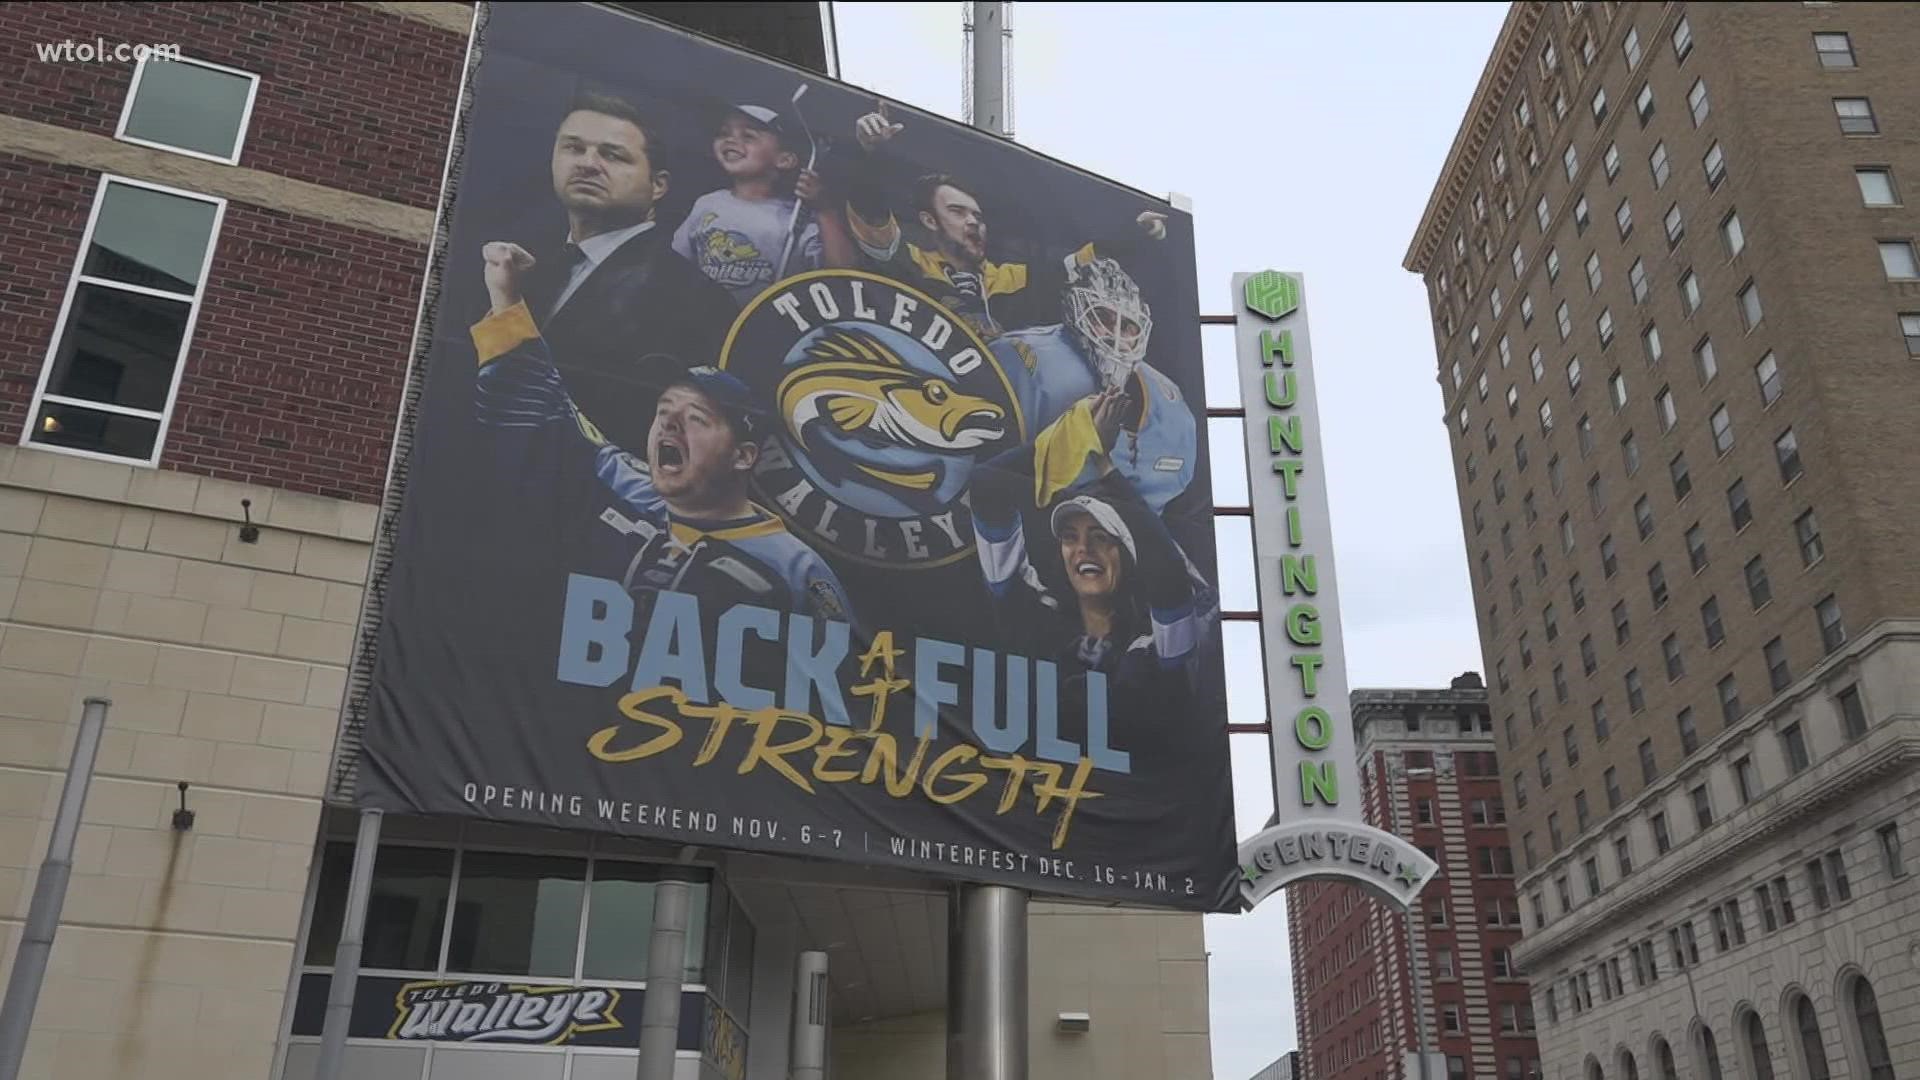 Just this weekend the Huntington Center saw the biggest crowd in its history. It's looking like Game 7 for the Walleye could be the same.